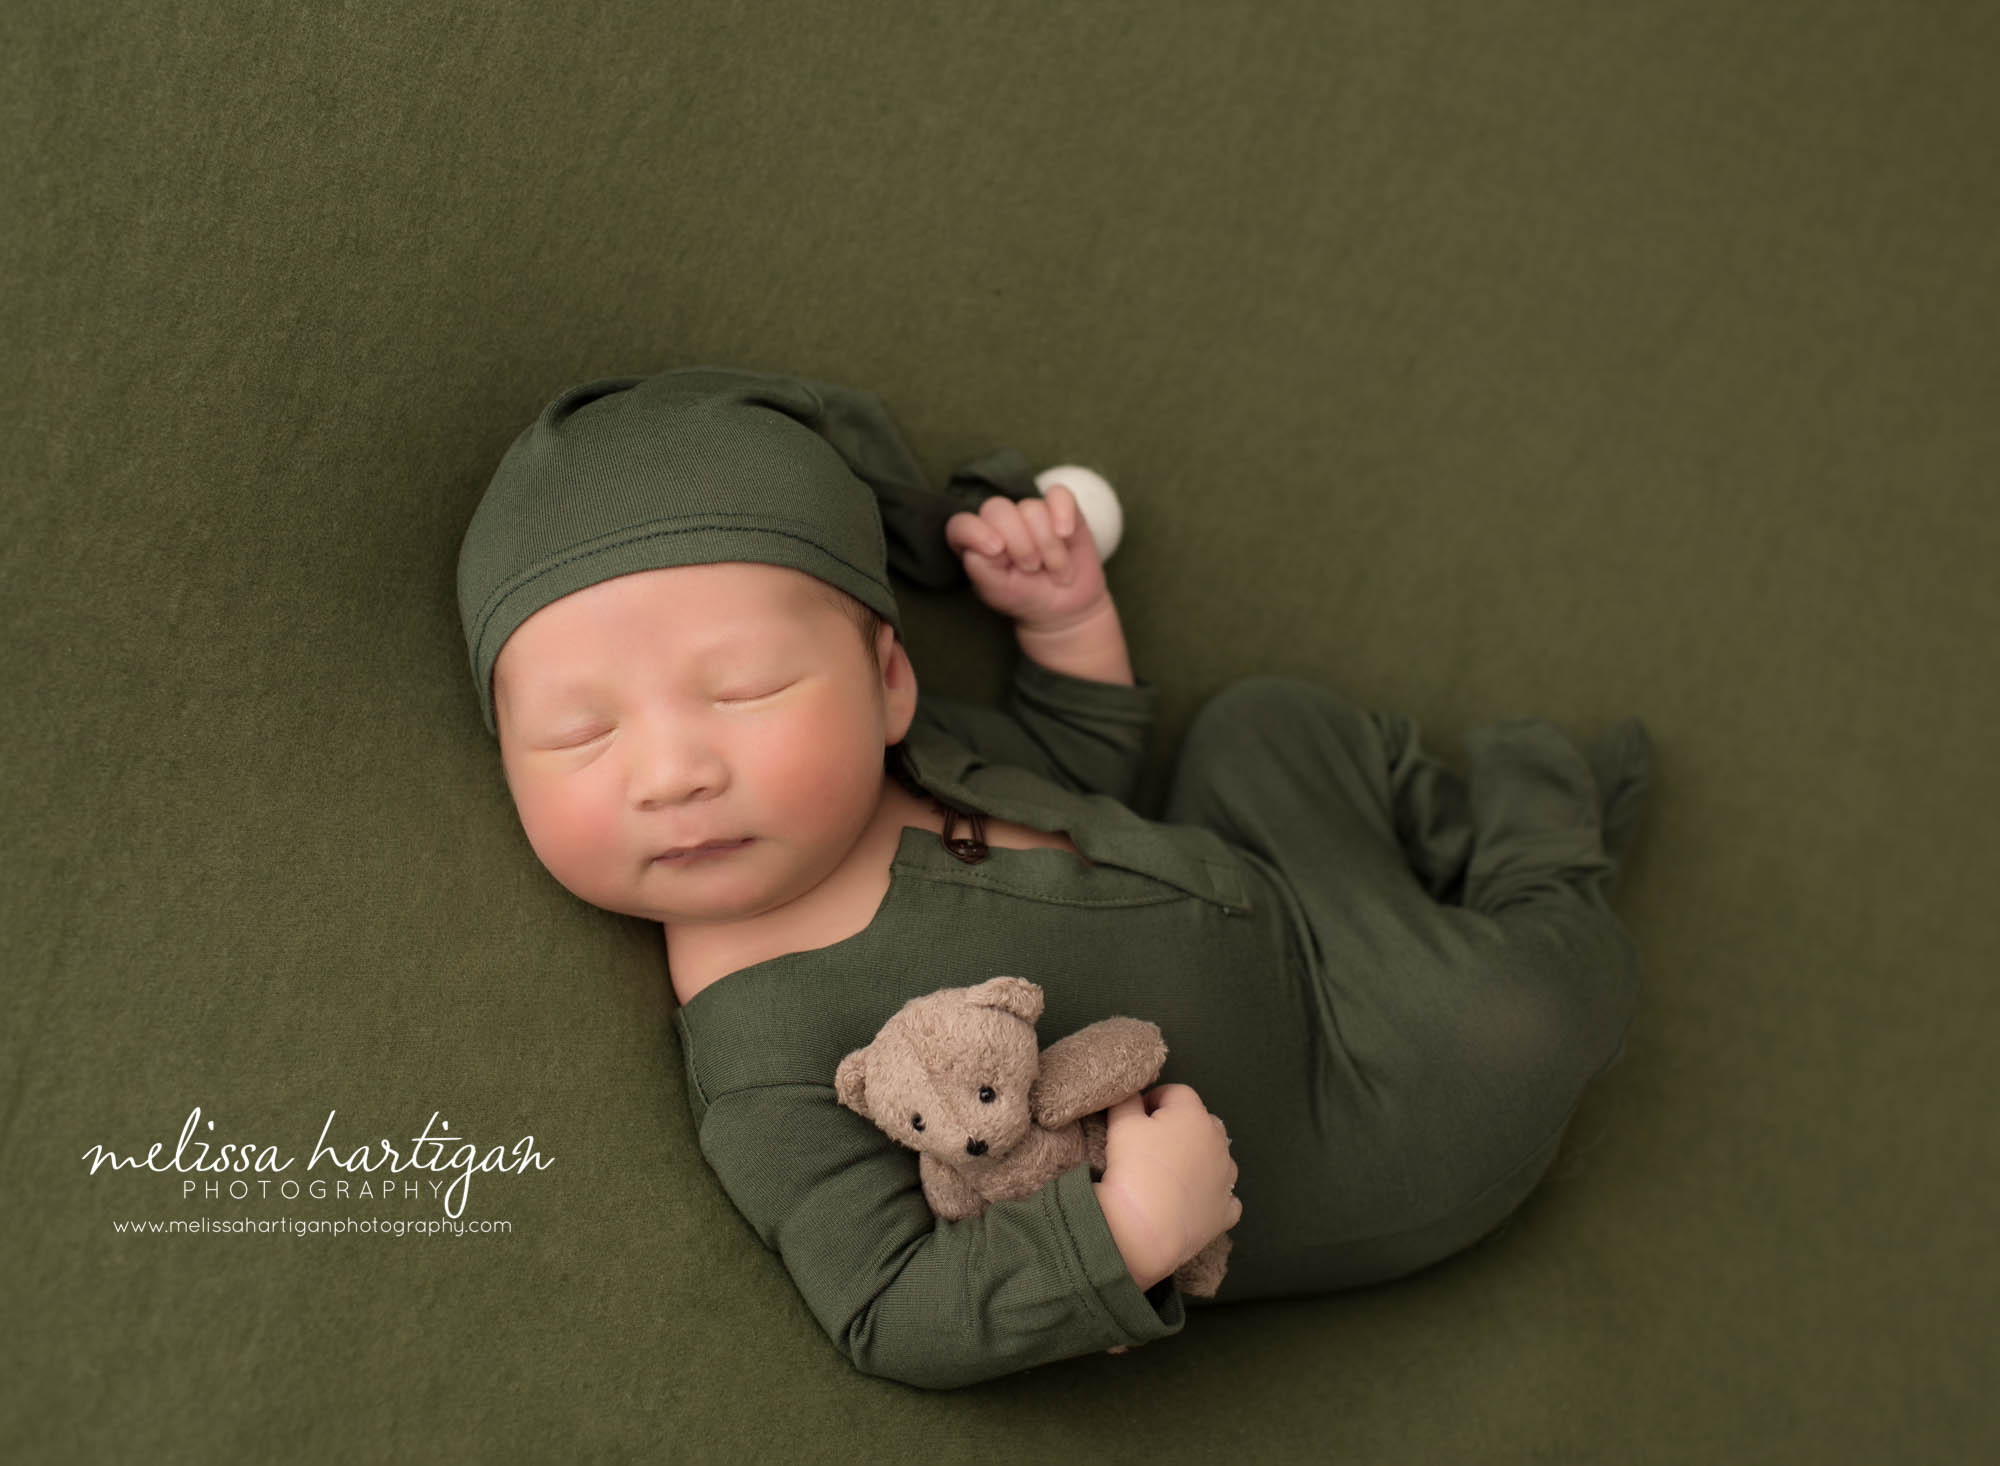 Newborn baby boy wearing green baby boy outfit with matching green sleepy cap posed with teddy bear prop Newborn Photography Ellington